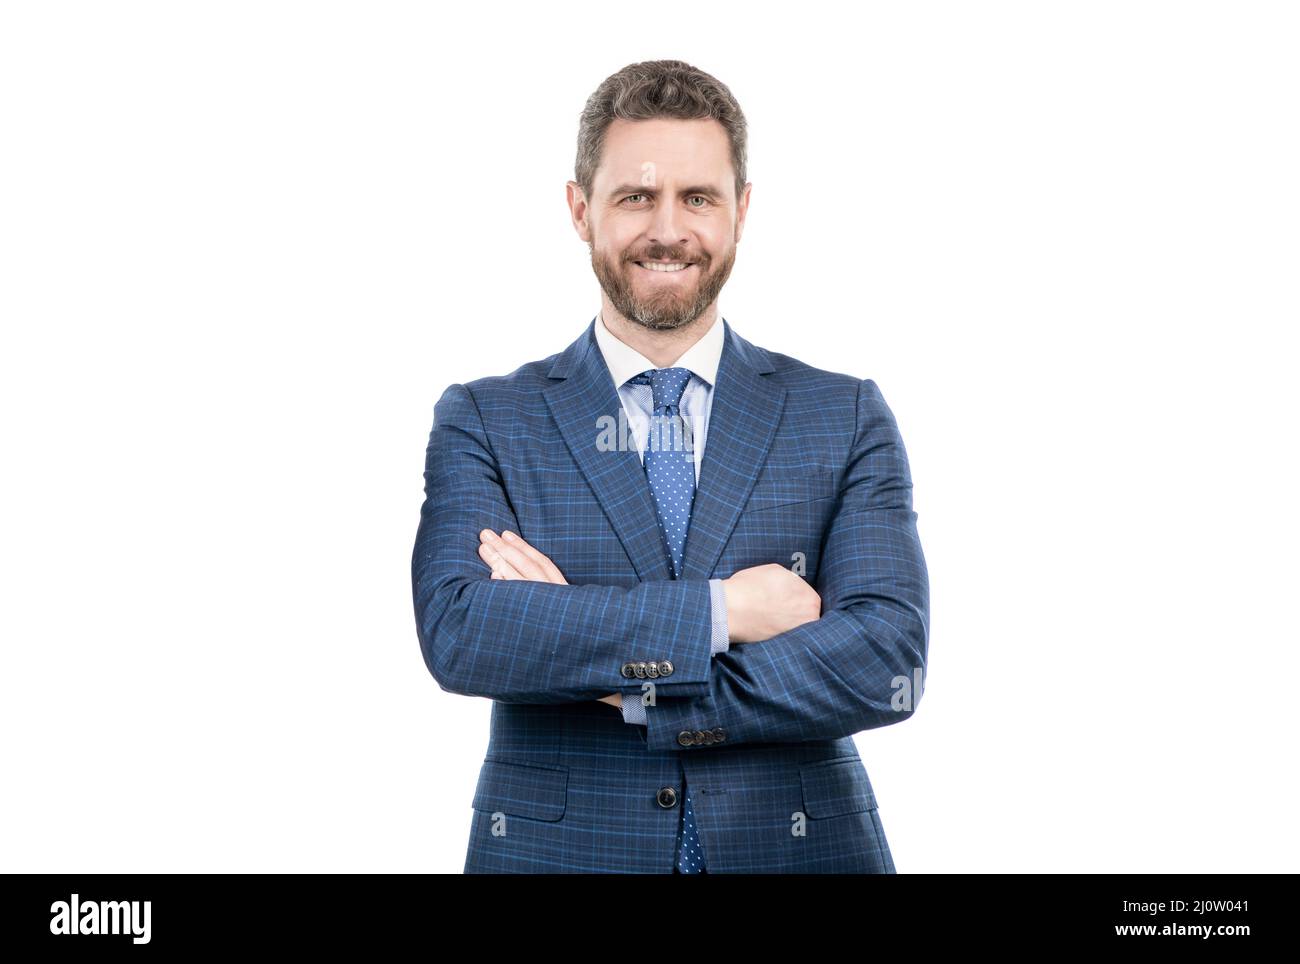 Business confidence. Businessman smile holding arms crossed. Confidence and professionalism Stock Photo